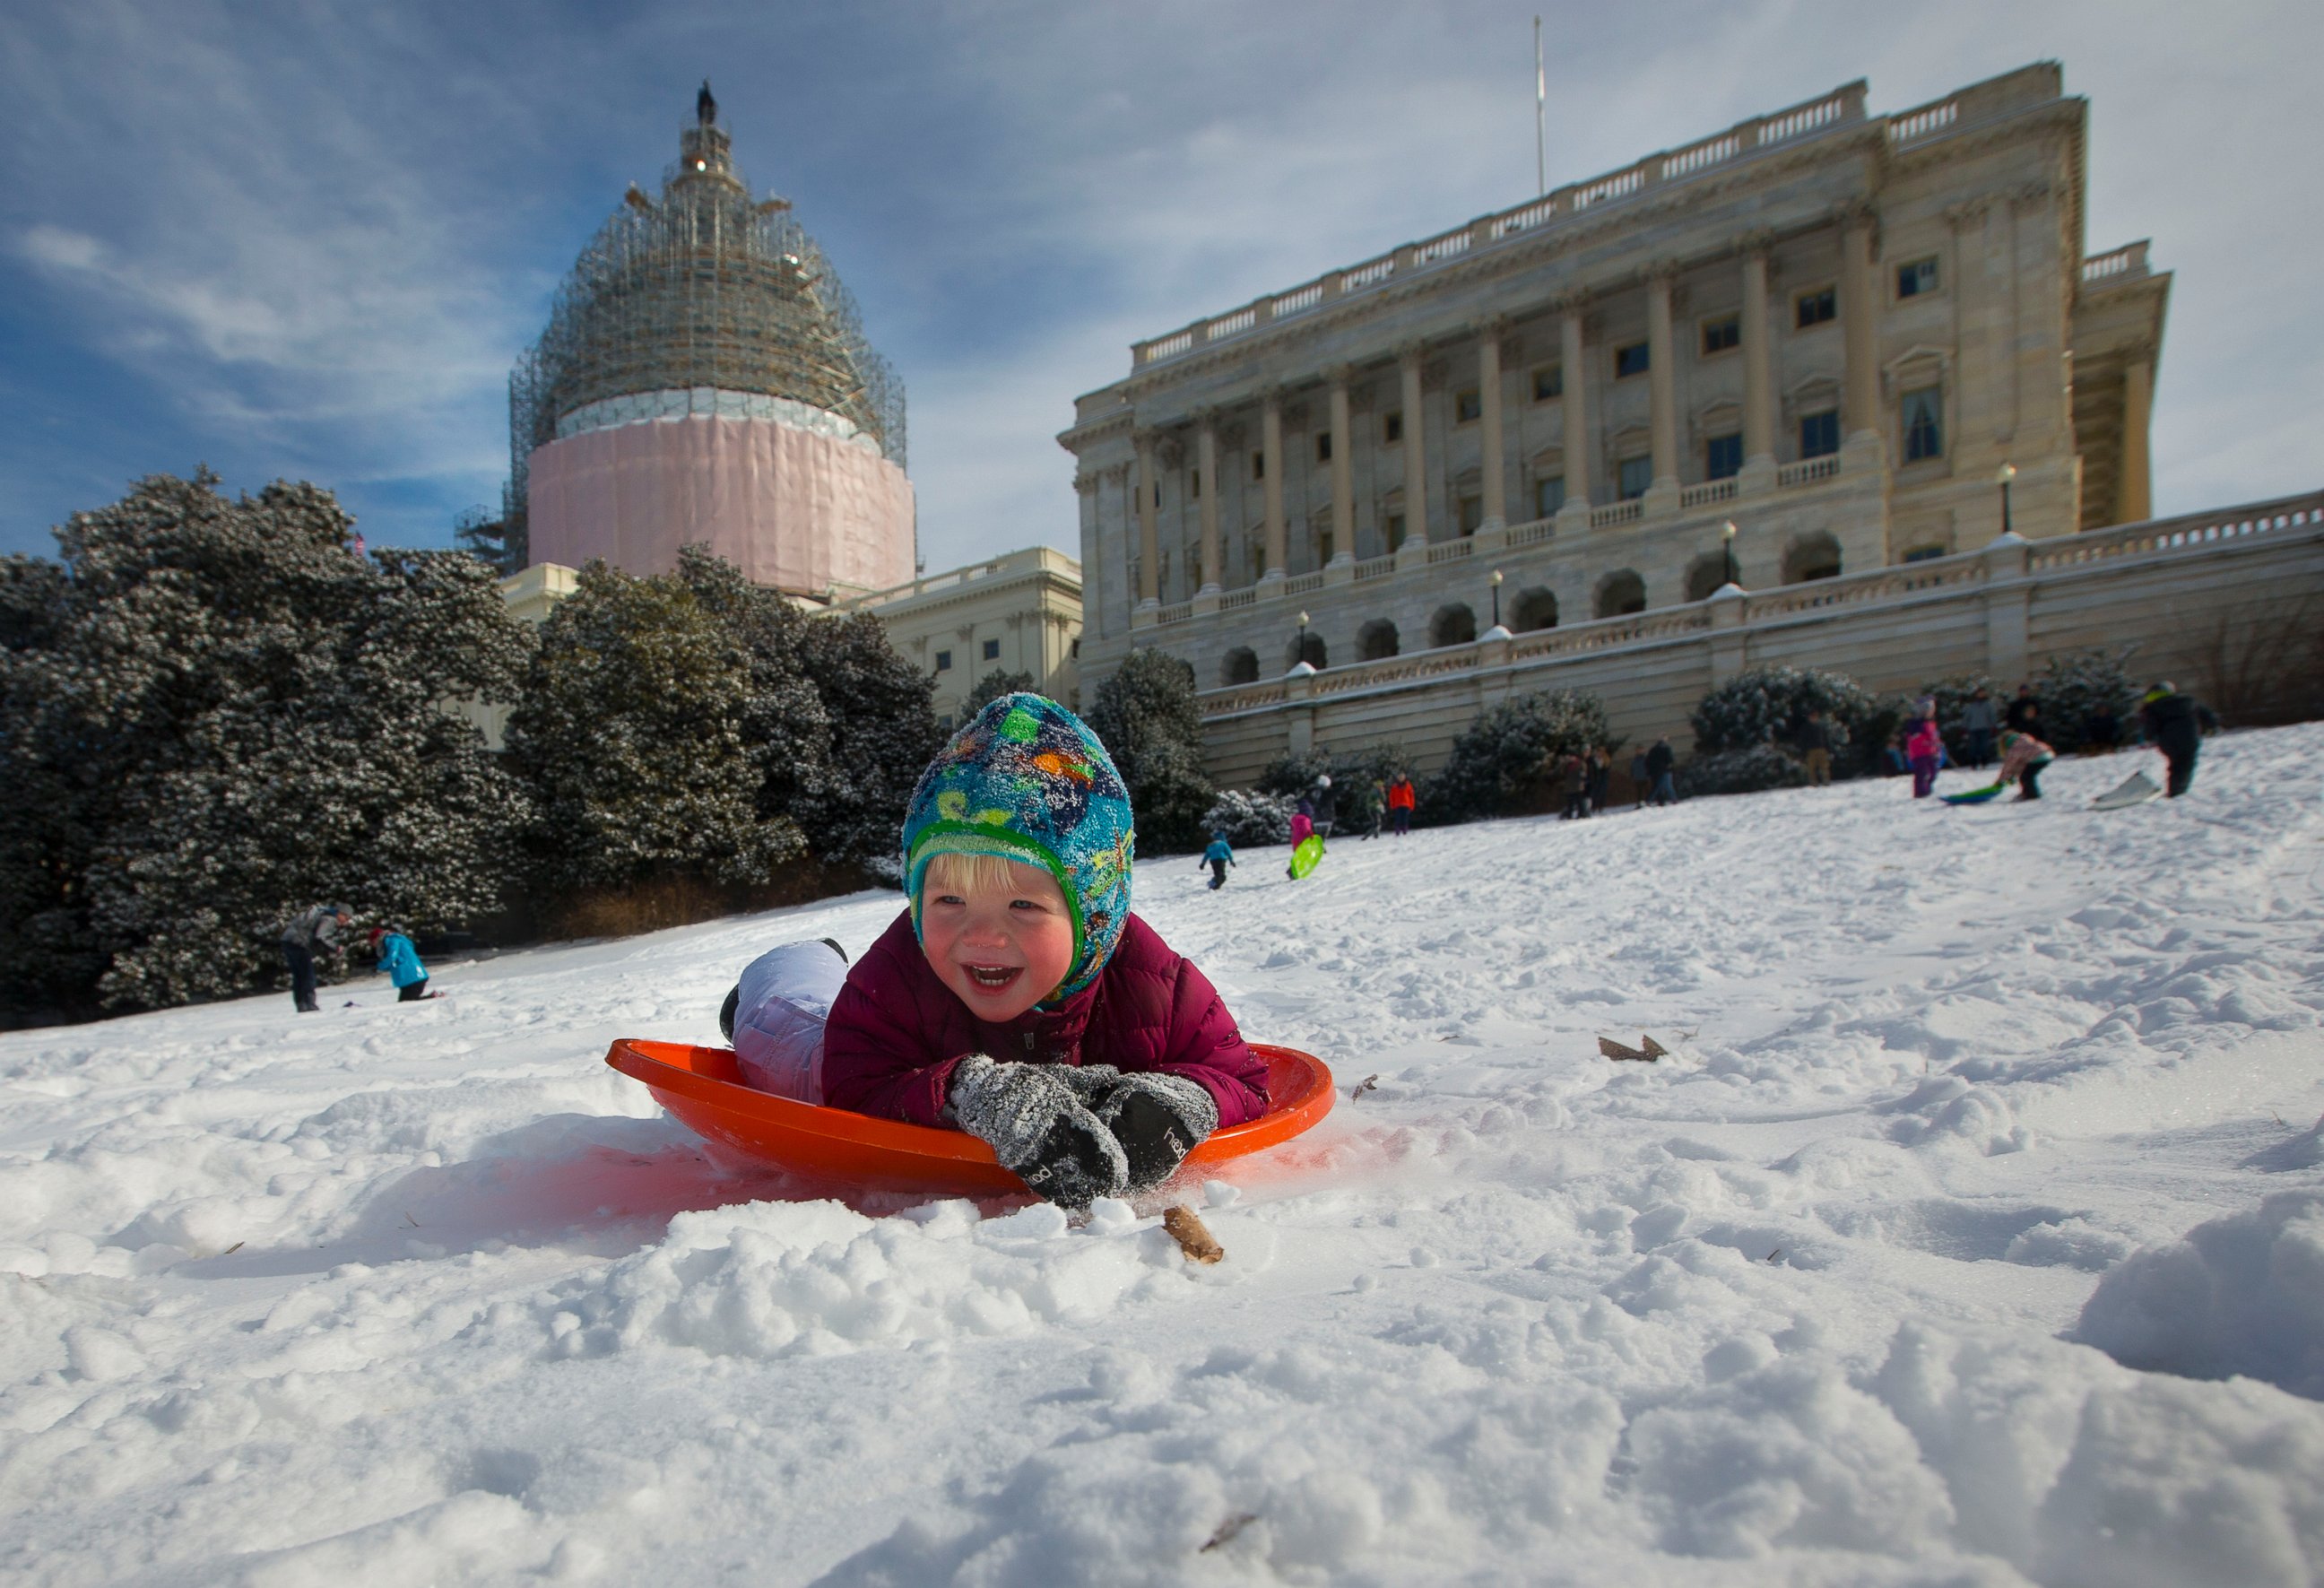 PHOTO: James Drobnyk, 2, joins others in sledding down the hill on Capitol Hill in Washington, D.C. on Feb. 17, 2015. 